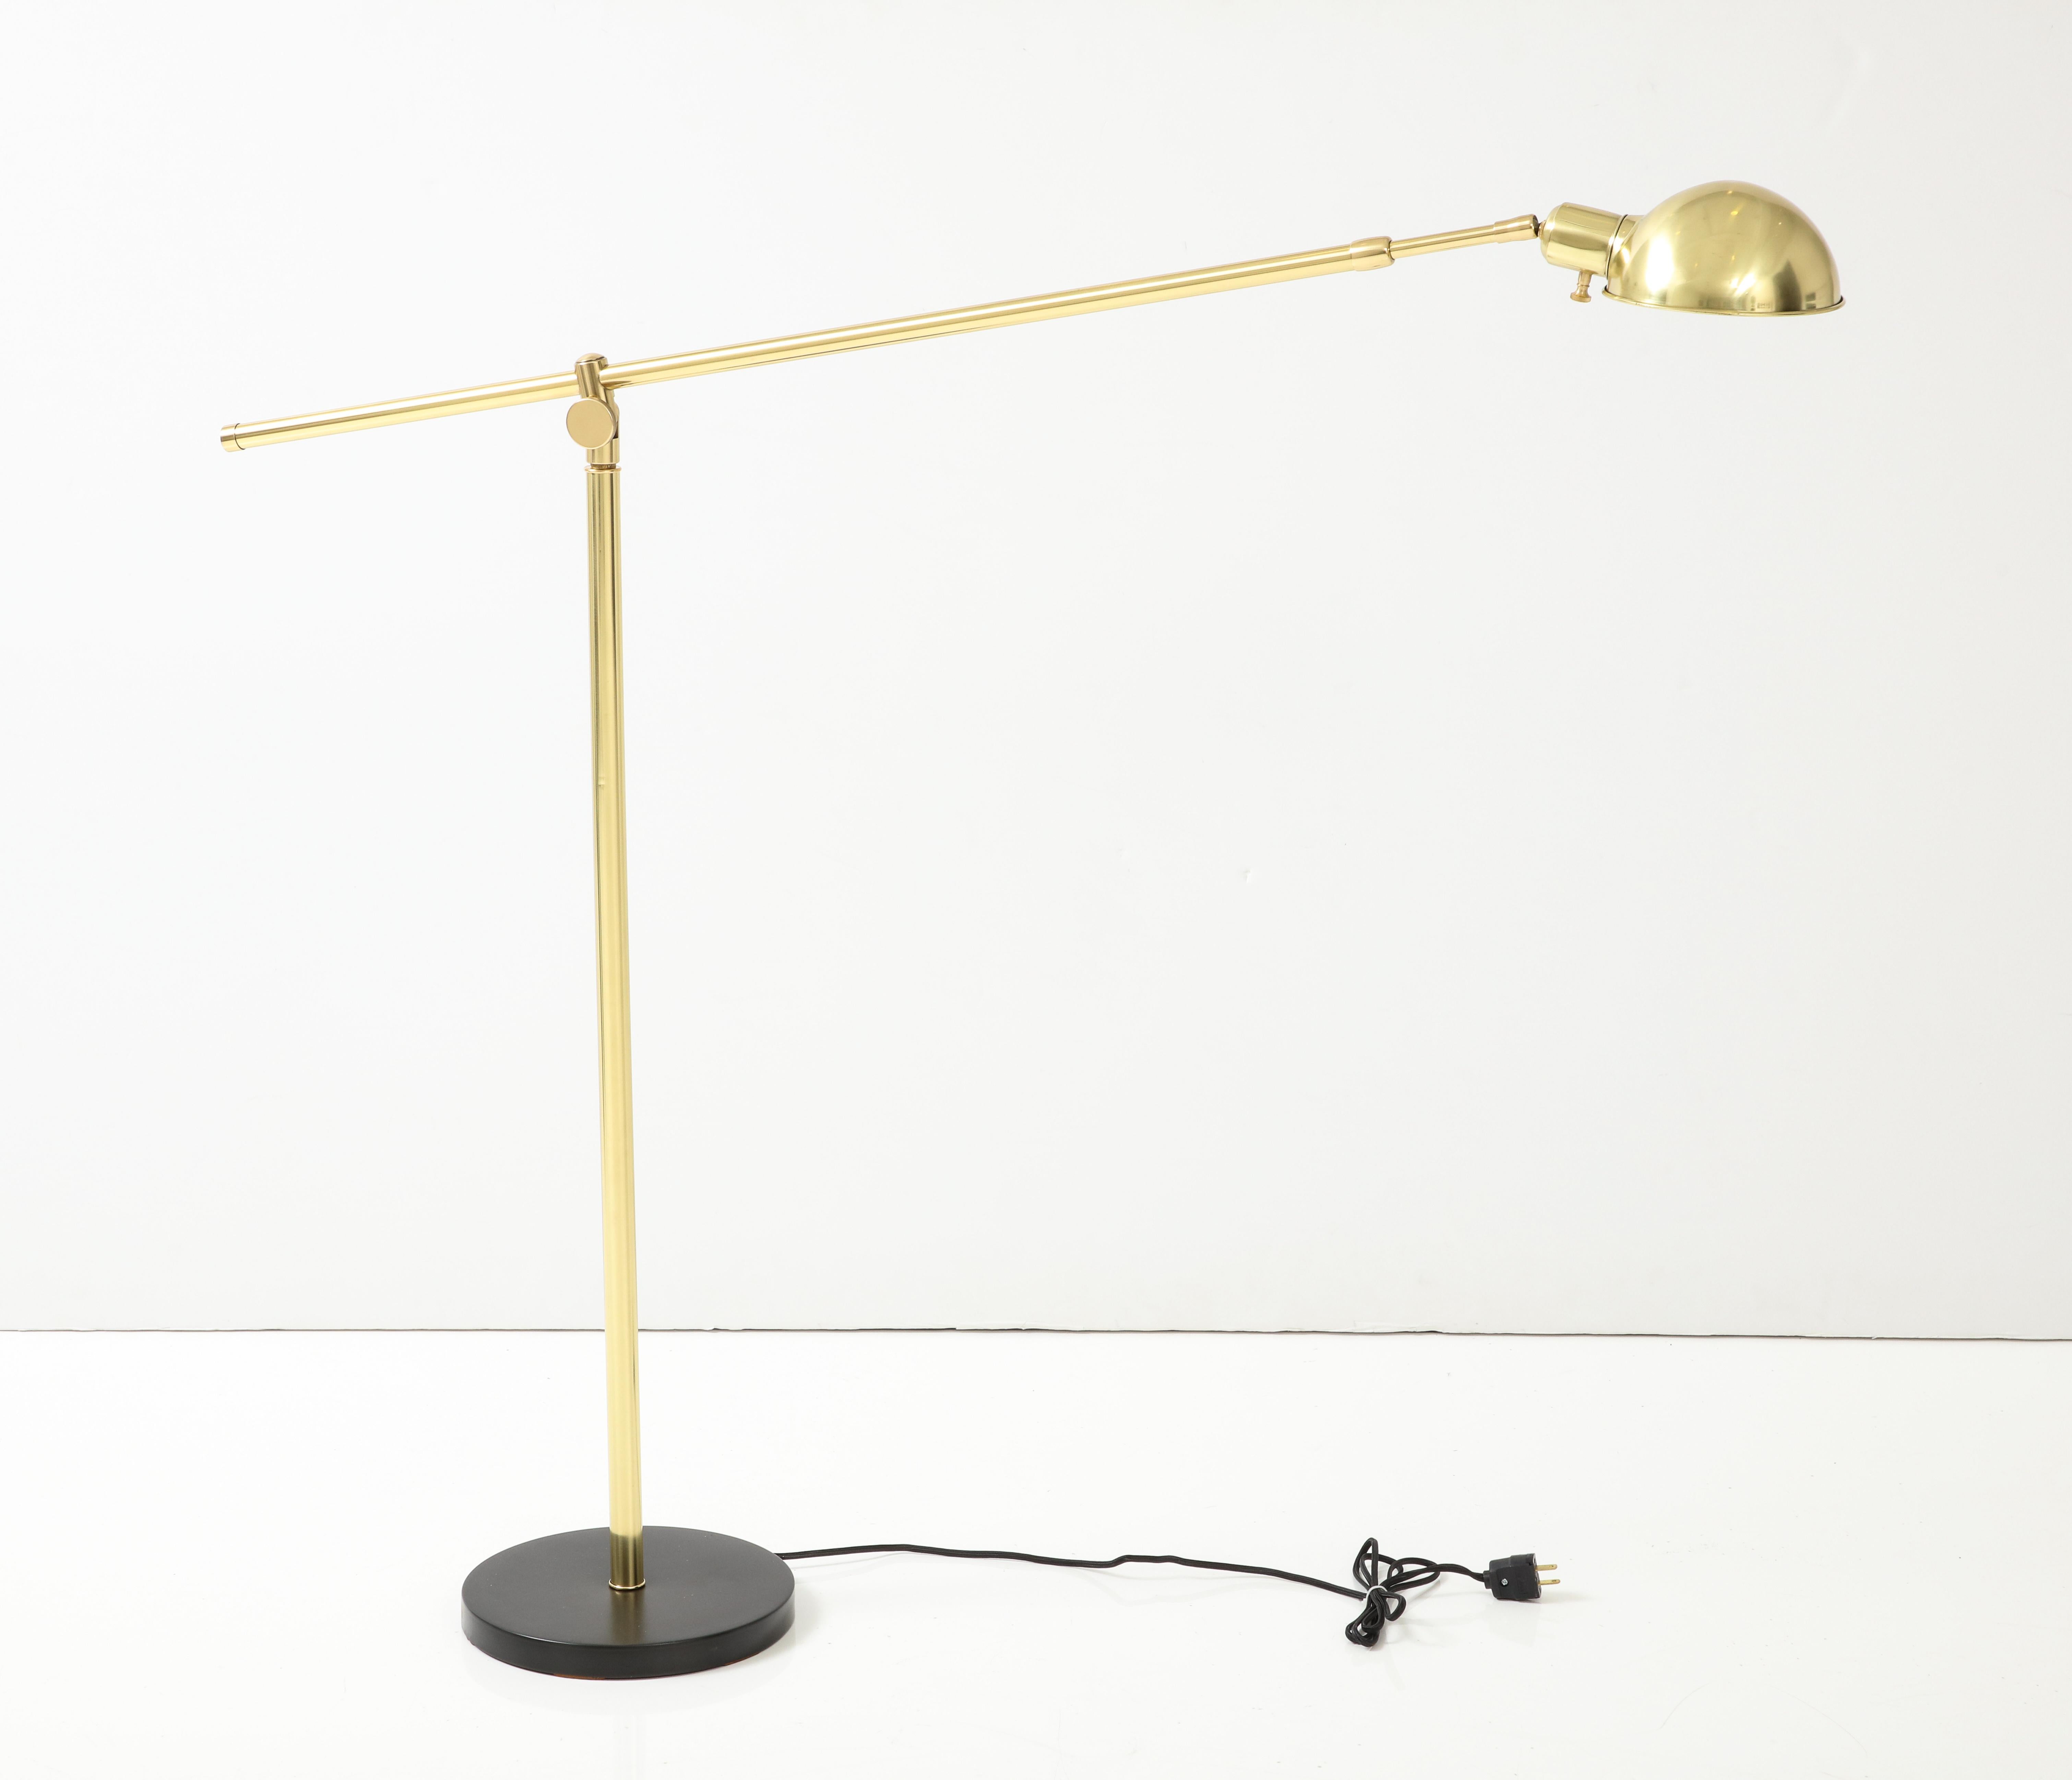 Florian Schulz Adjustable Brass Floor Lamp In Excellent Condition For Sale In New York, NY